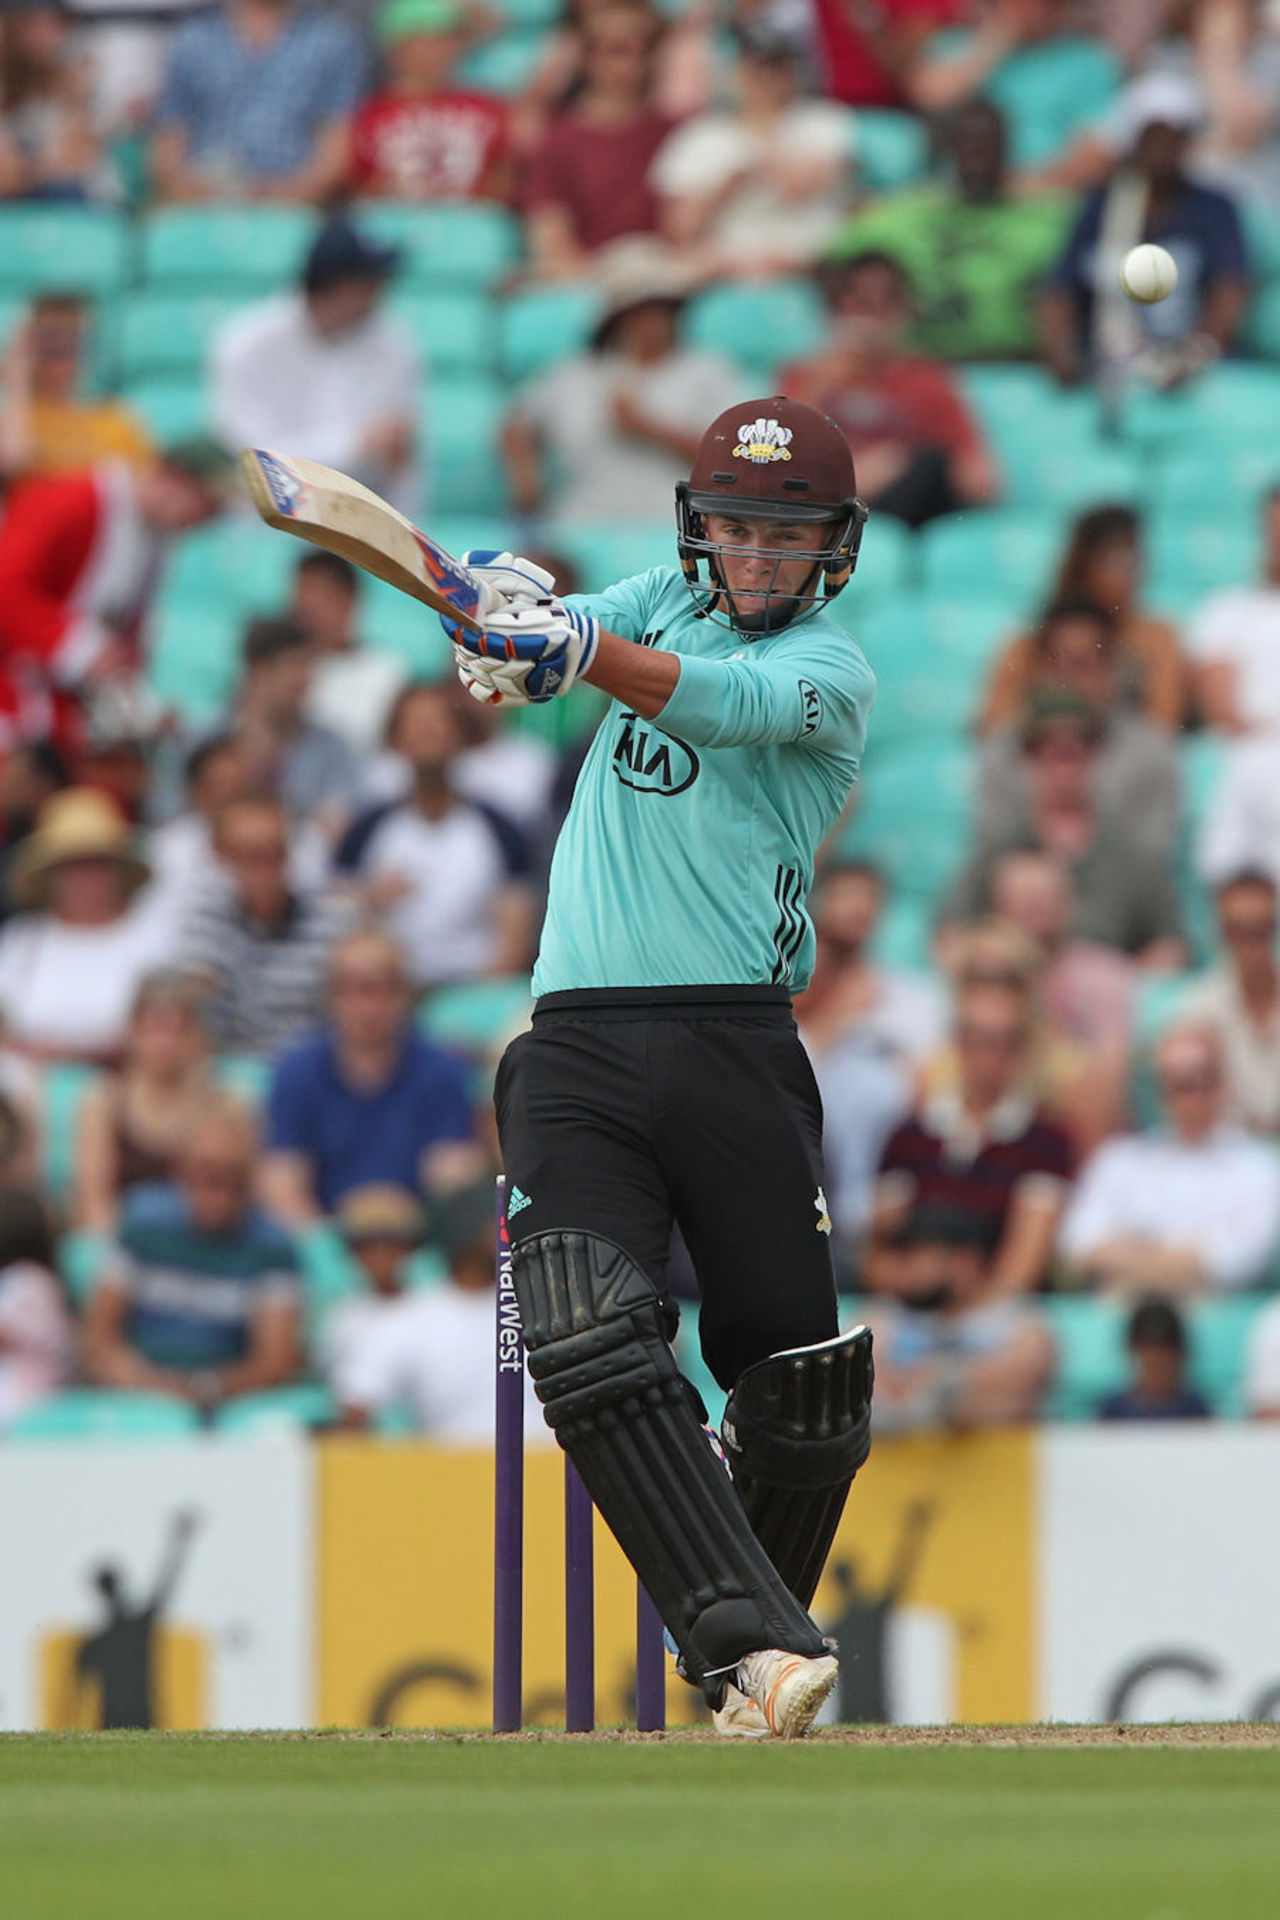 Sam Curran added zest to Surrey's innings , Surrey v Somerset, NatWest Blast, South Group, Kia Oval, July 9, 2017